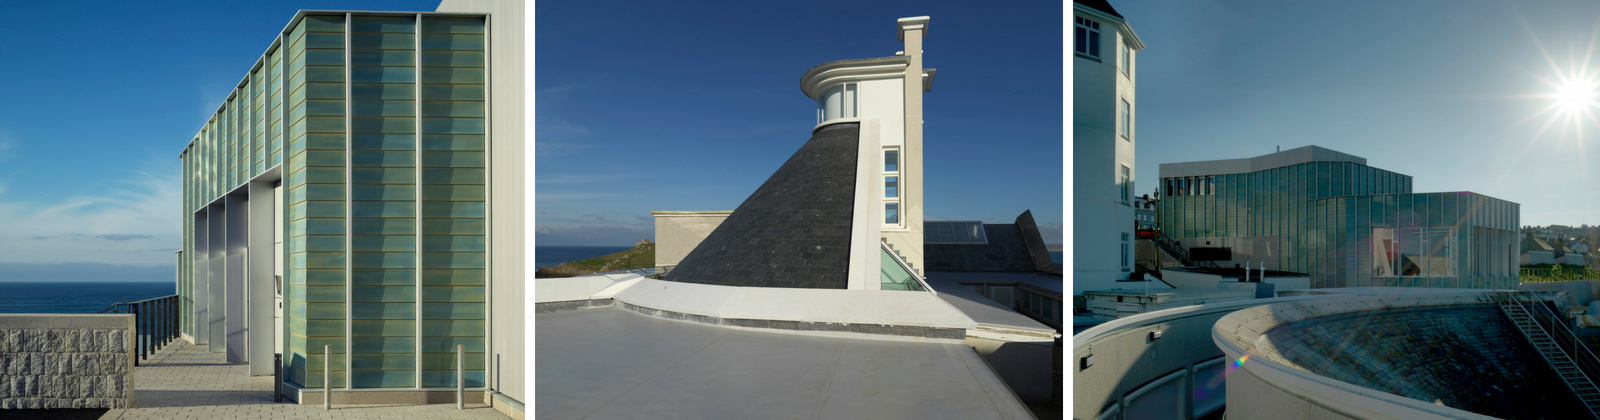 Tate St Ives wins Building of the Year